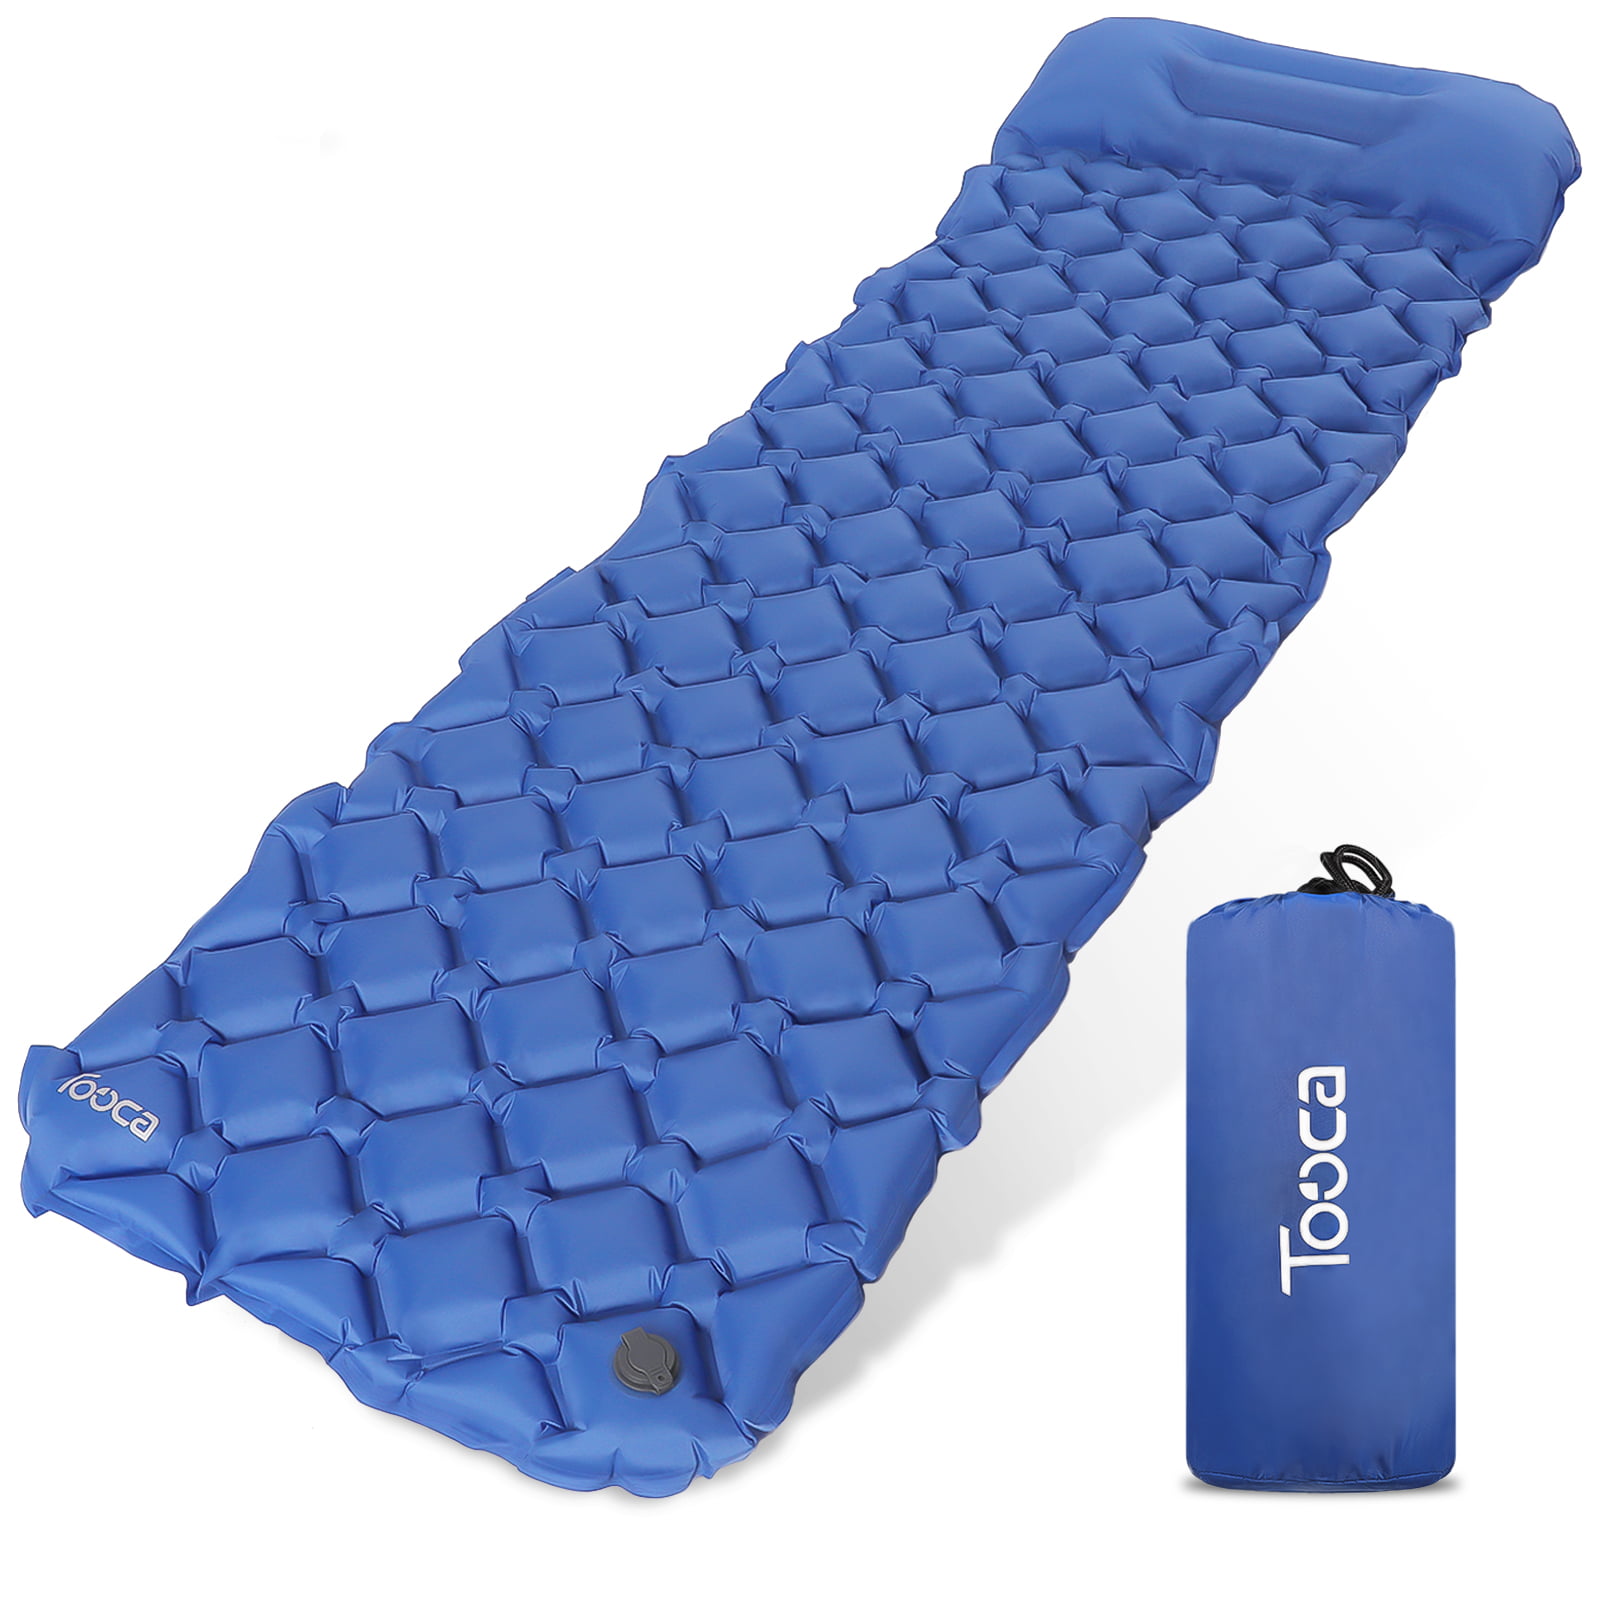 Inflatable Sleeping Mat with Pillow Ultralight Camping Pad Waterproof Air Mattress Folding Inflating Single Bed waterproof Air Pad for indoor and outdoor for Hiking travel,Sport,Backpacking Blue 